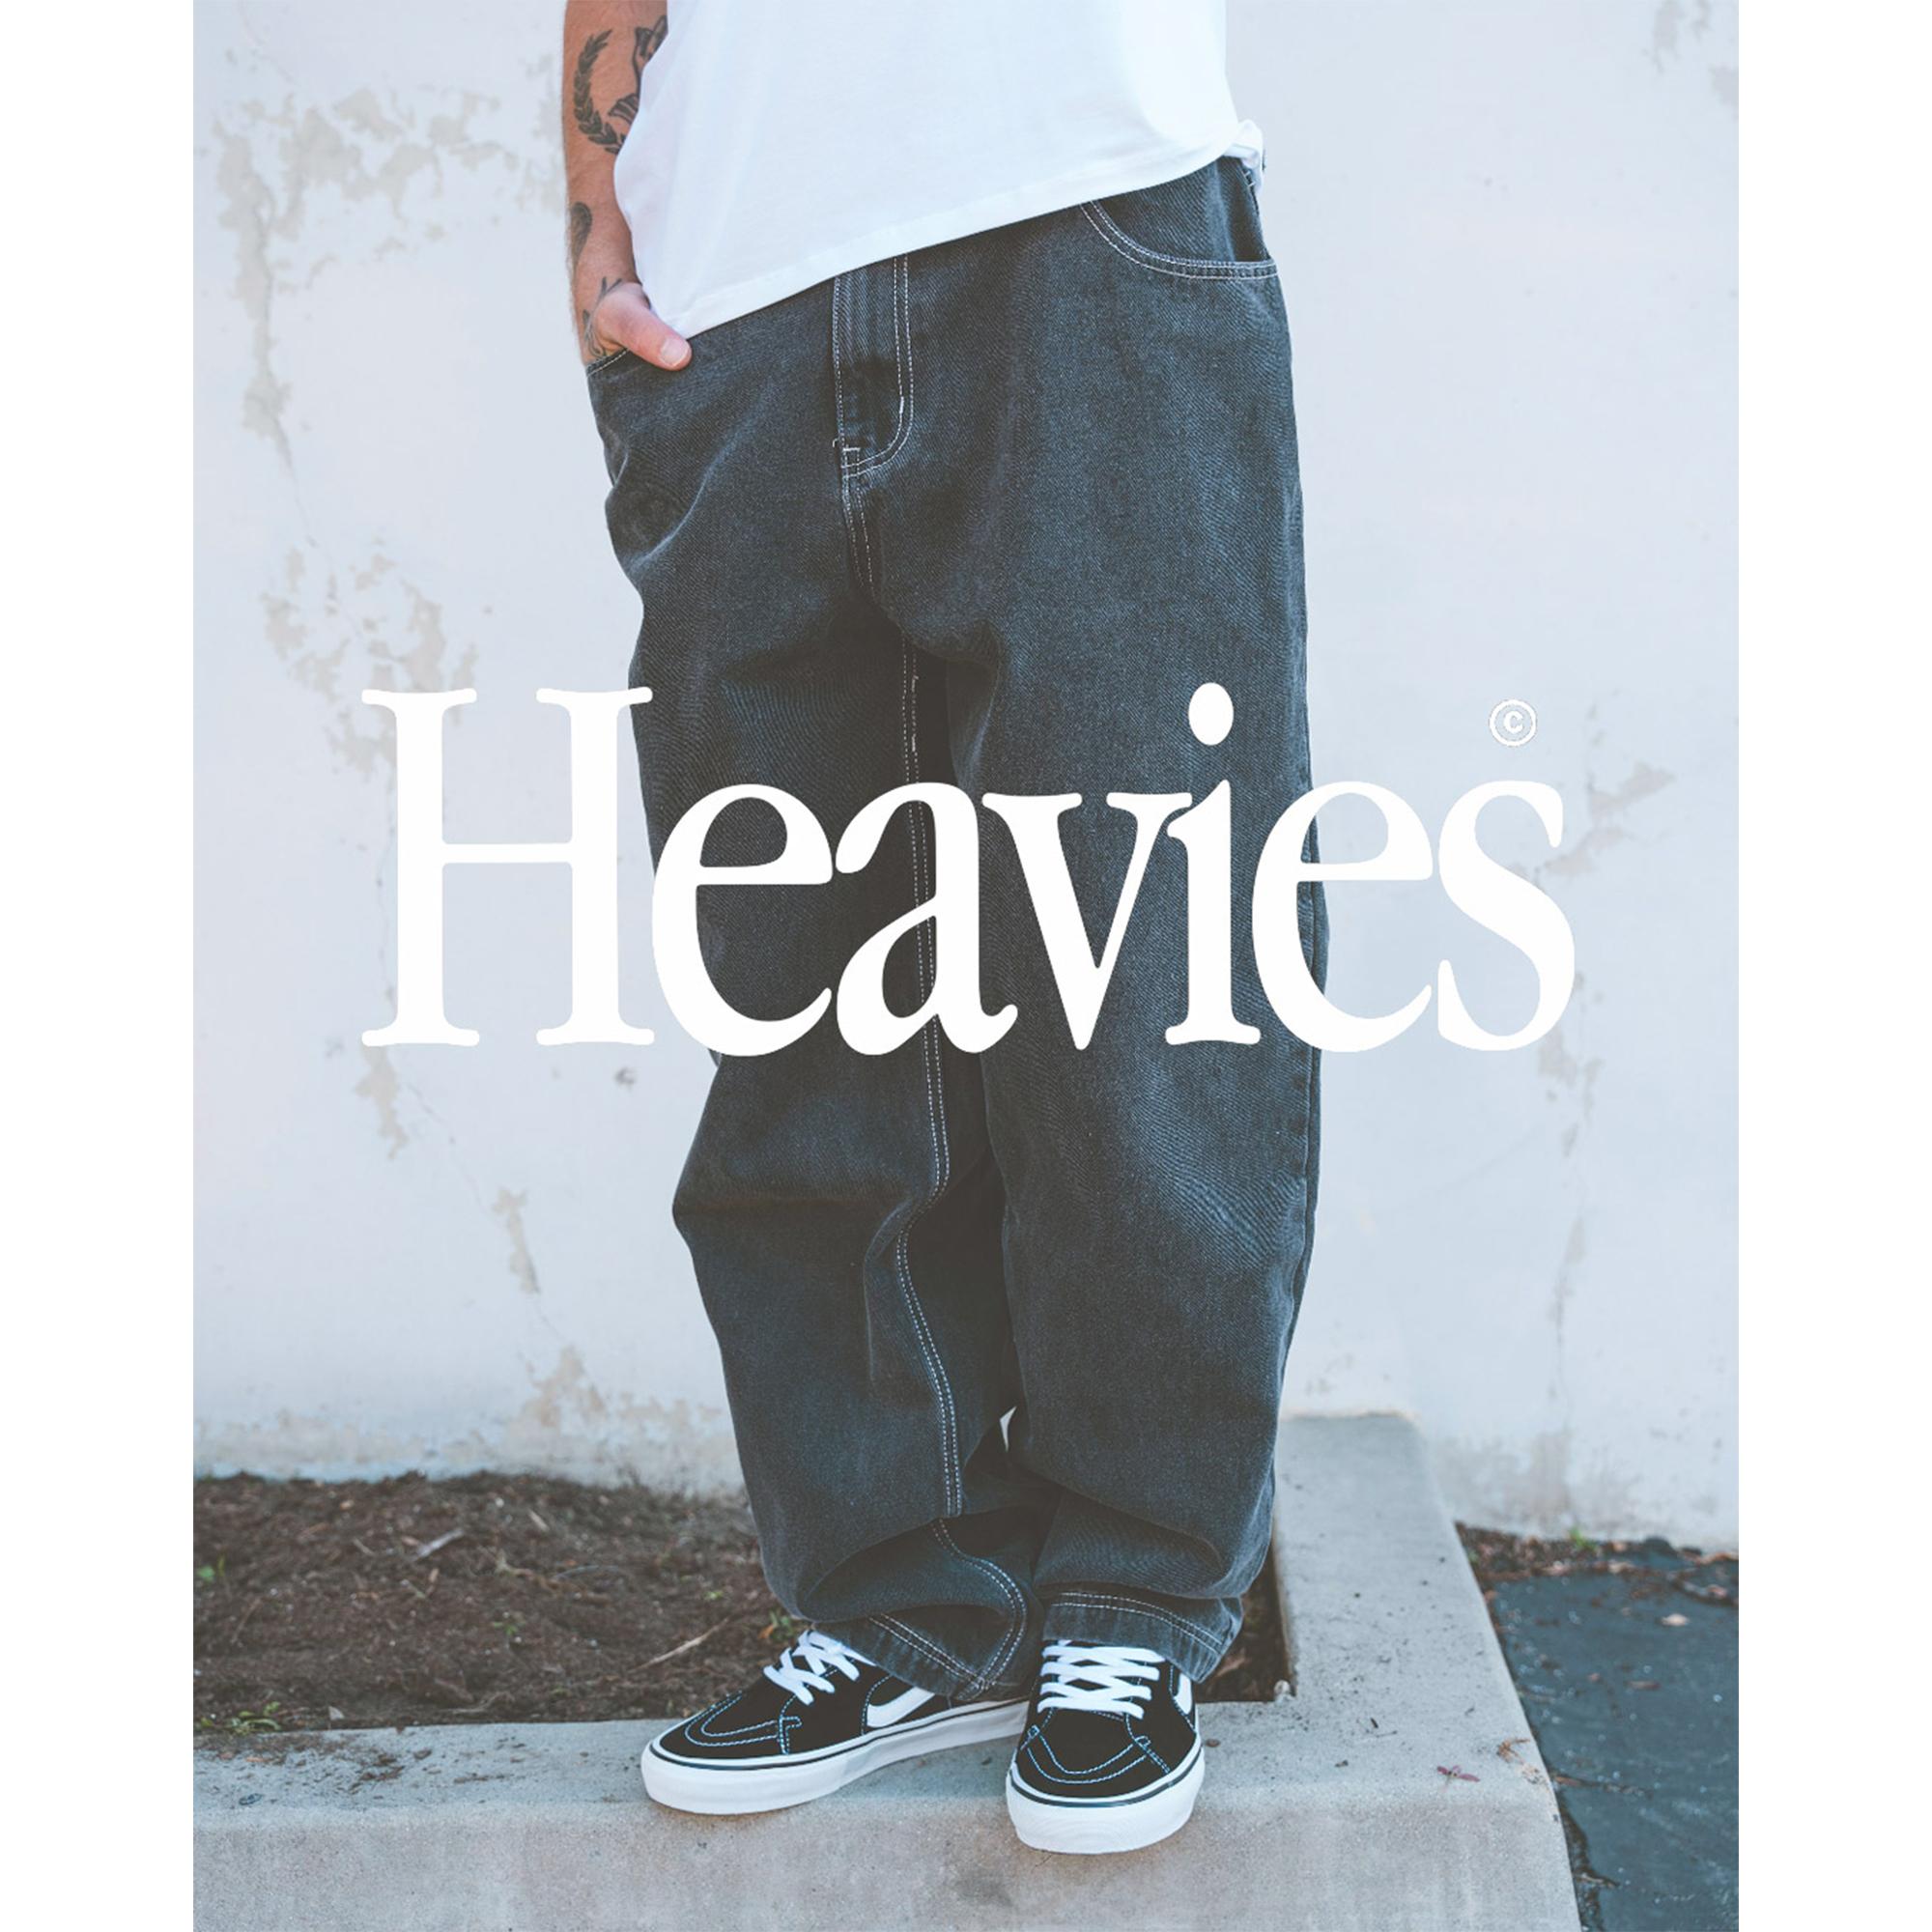 You are currently viewing [HEAVIES] 新入荷のお知らせ